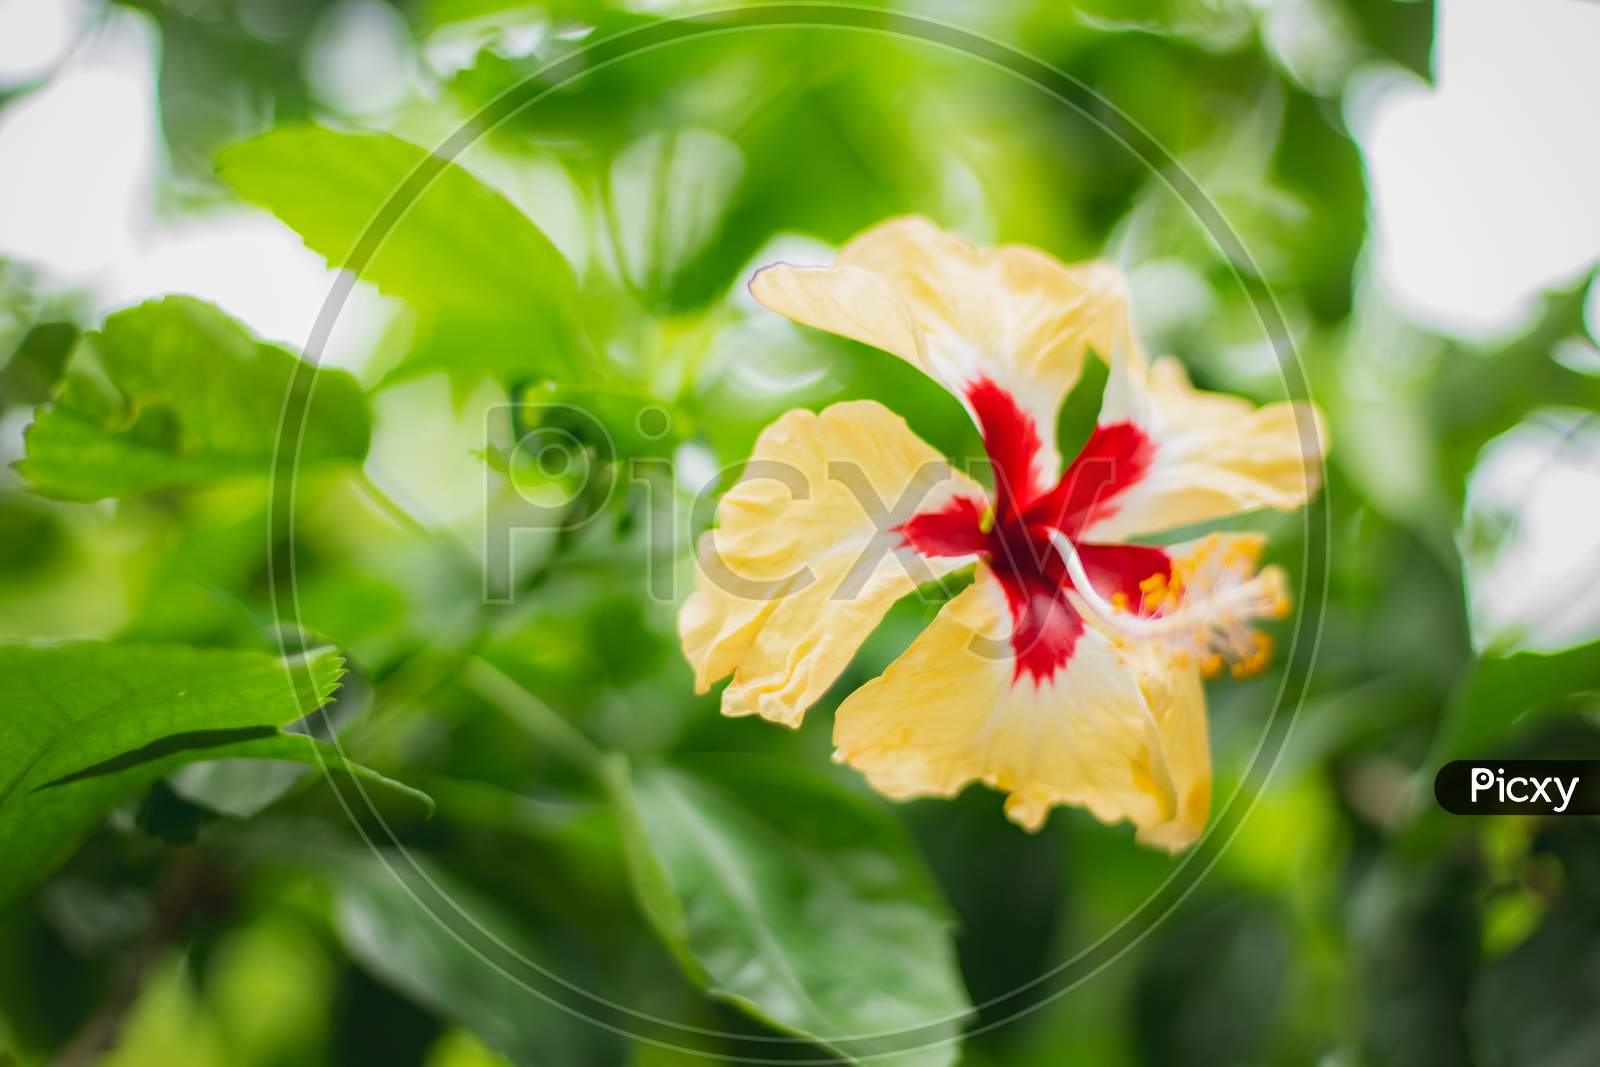 Multicolor Red & Yellow Hibiscus Rosa Flower Close Up Macro Shot . Colloquially As Chinese Hibiscus, China Rose, Hawaiian Hibiscus, Rose Mallow & Shoeblackplant, Species Of Tropical Hibiscus,